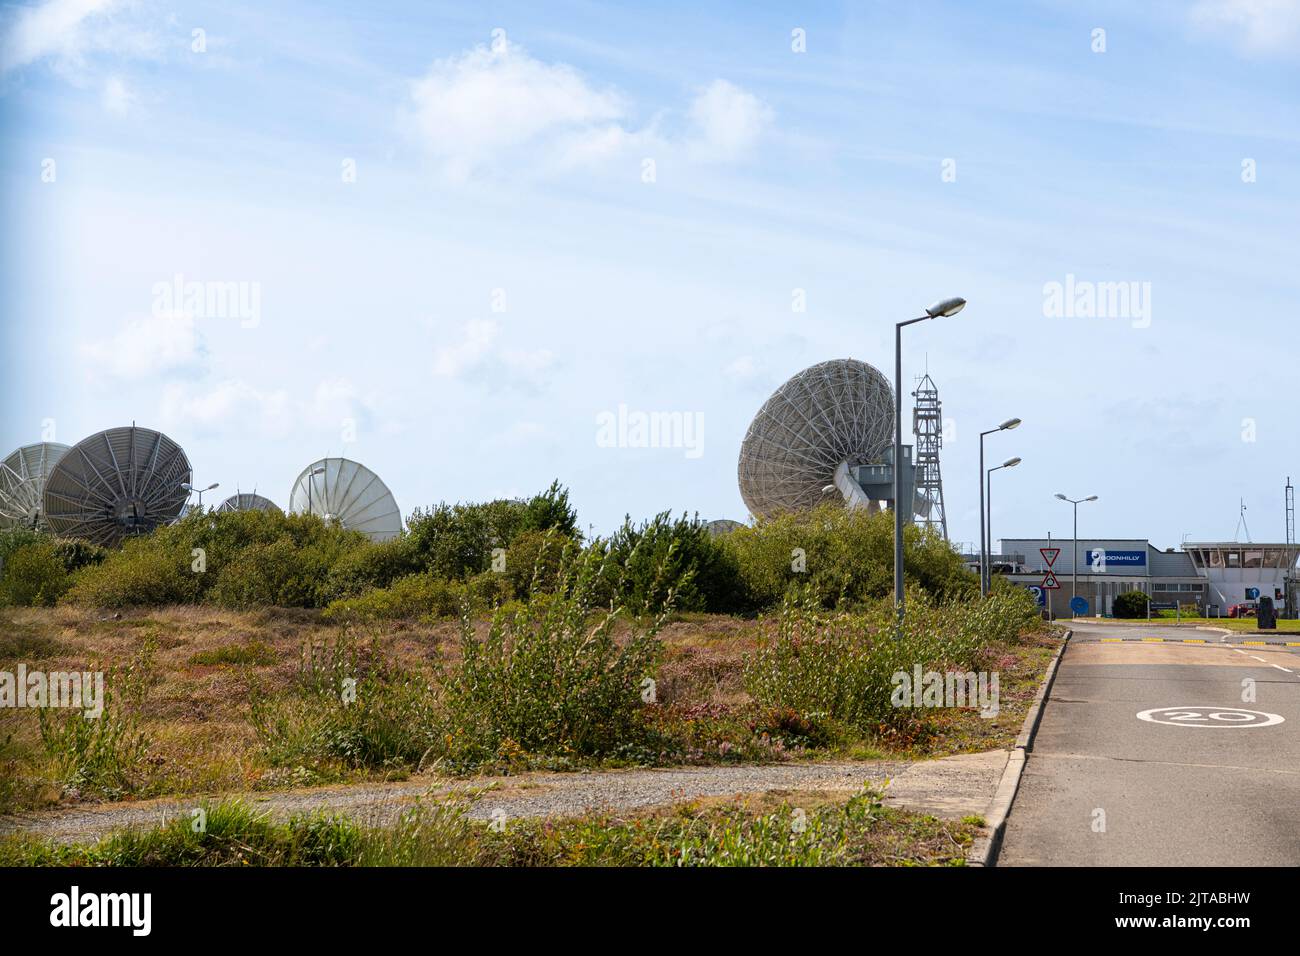 Cornwall,plays a part in Artemis 1 launch, Goonhilly Earth Station,communications support for NASA’s Artemis 1 mission, Stock Photo